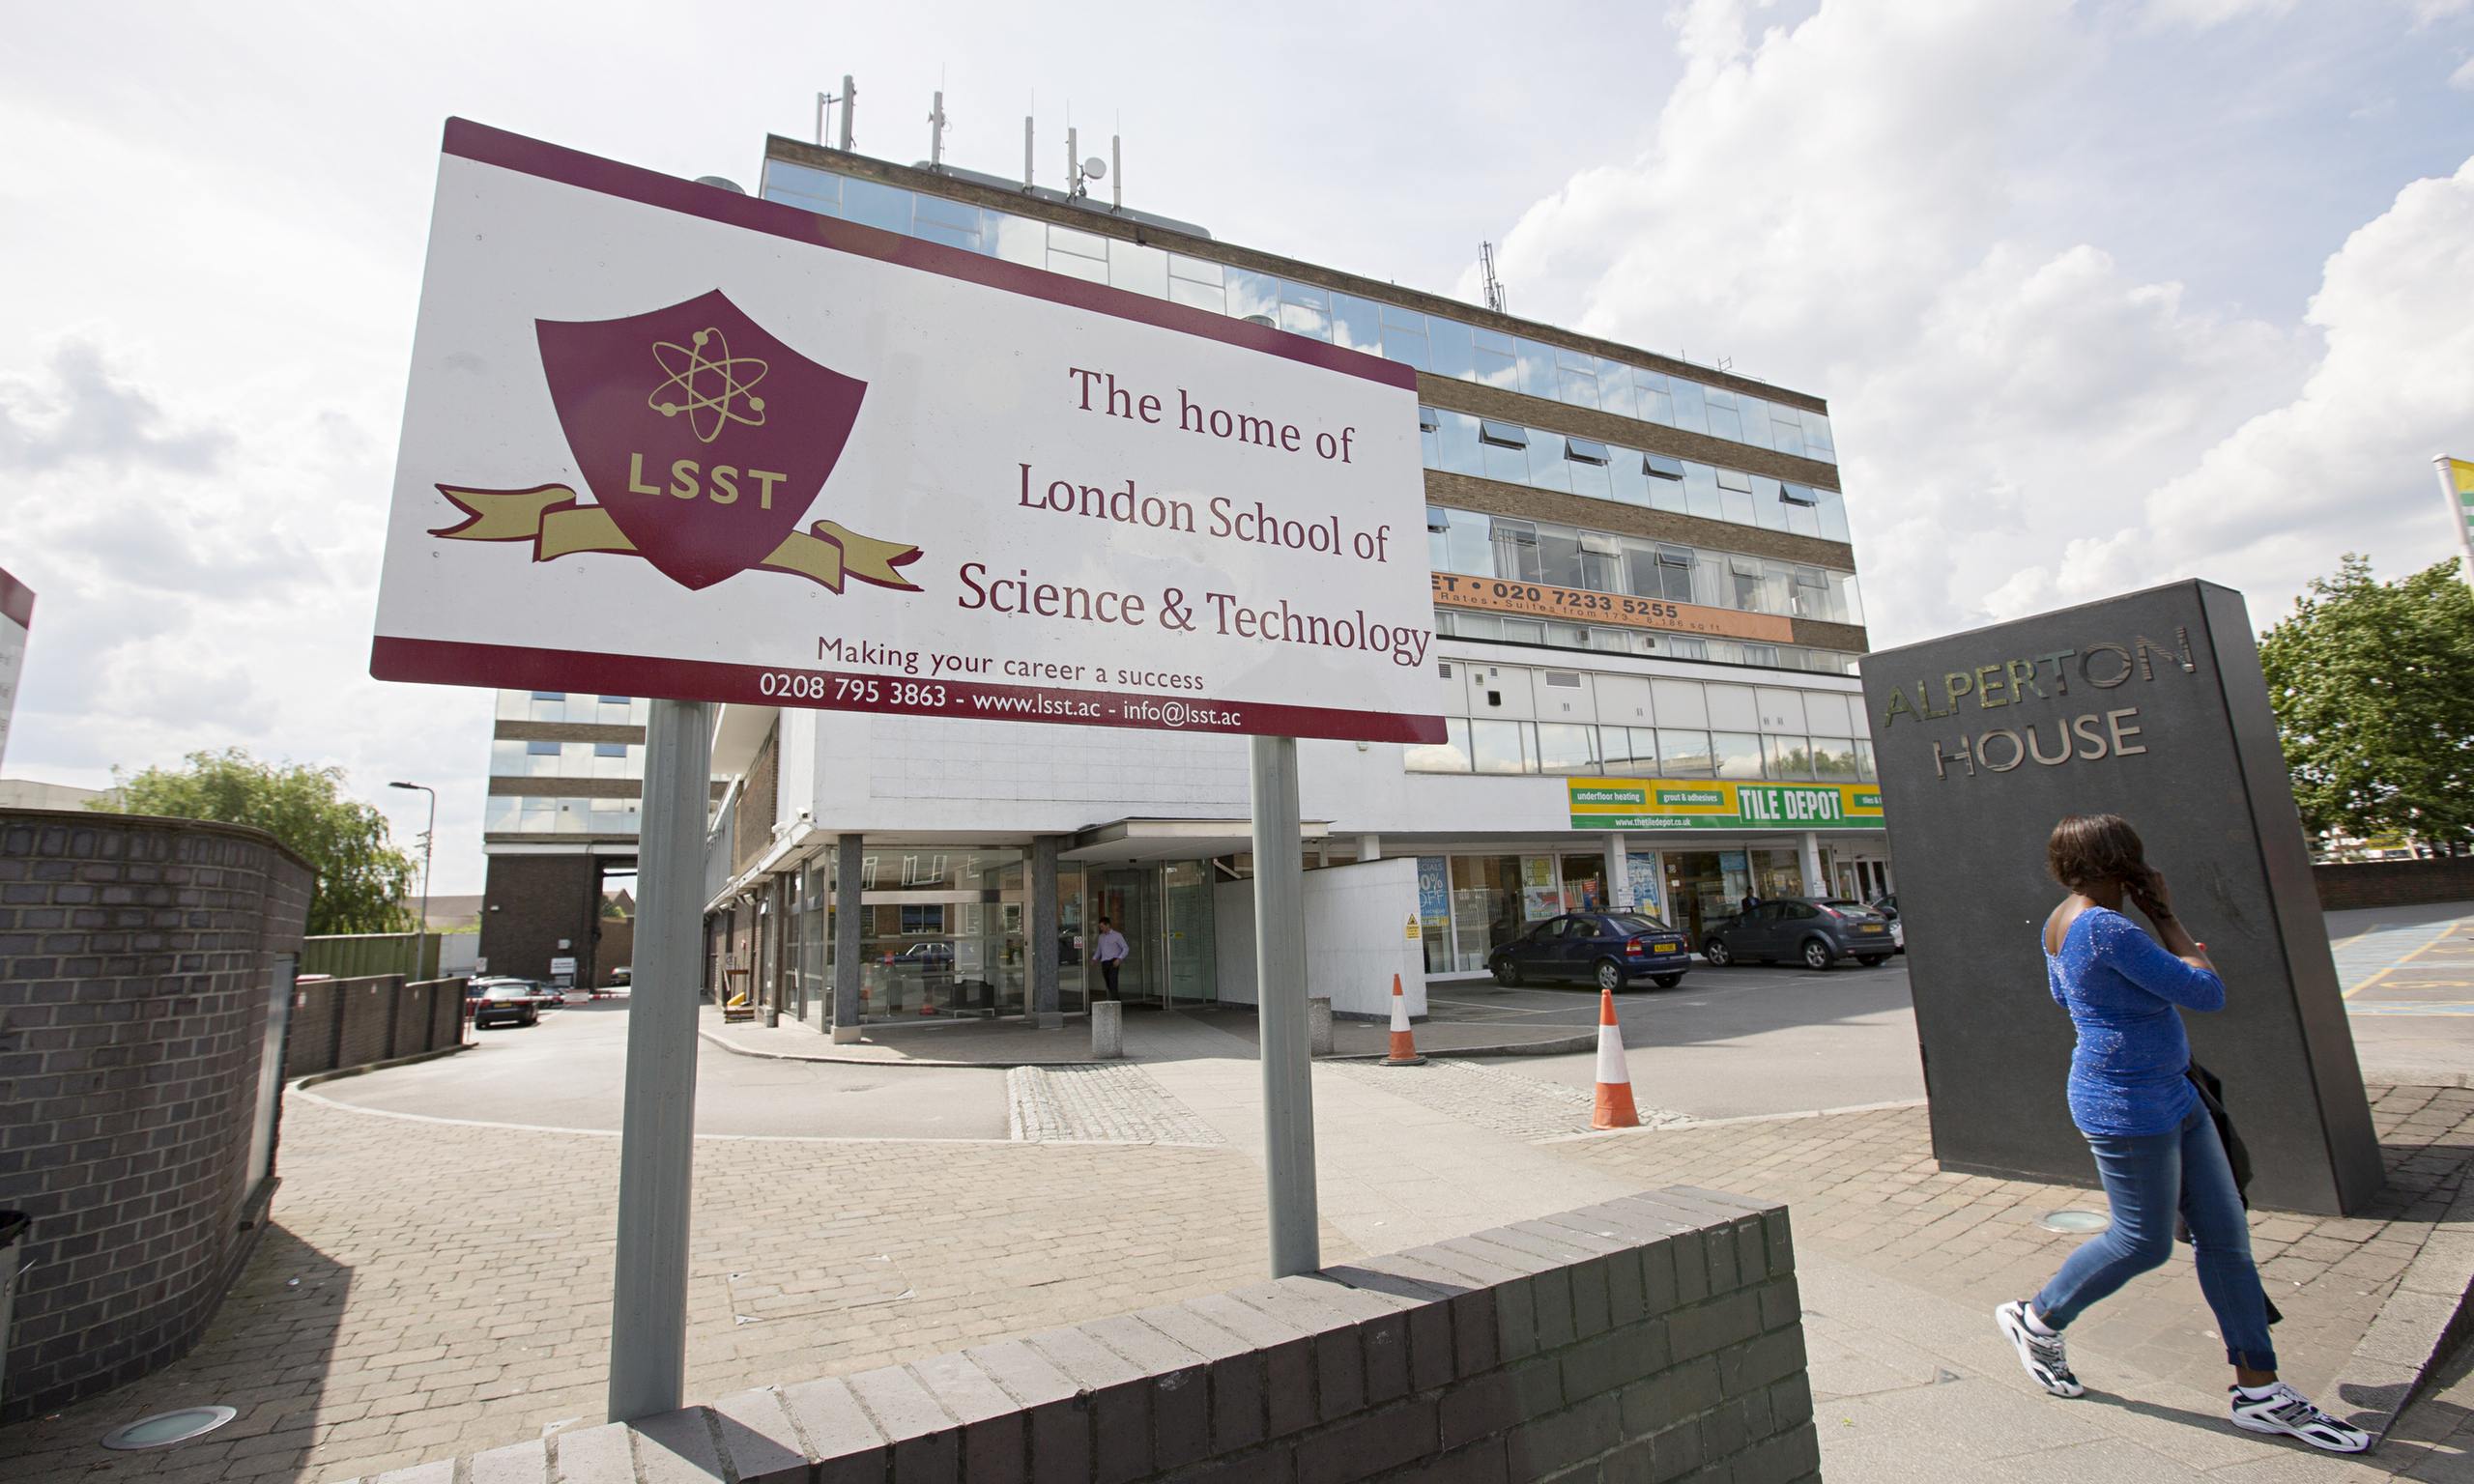 The London School of Science and Technology